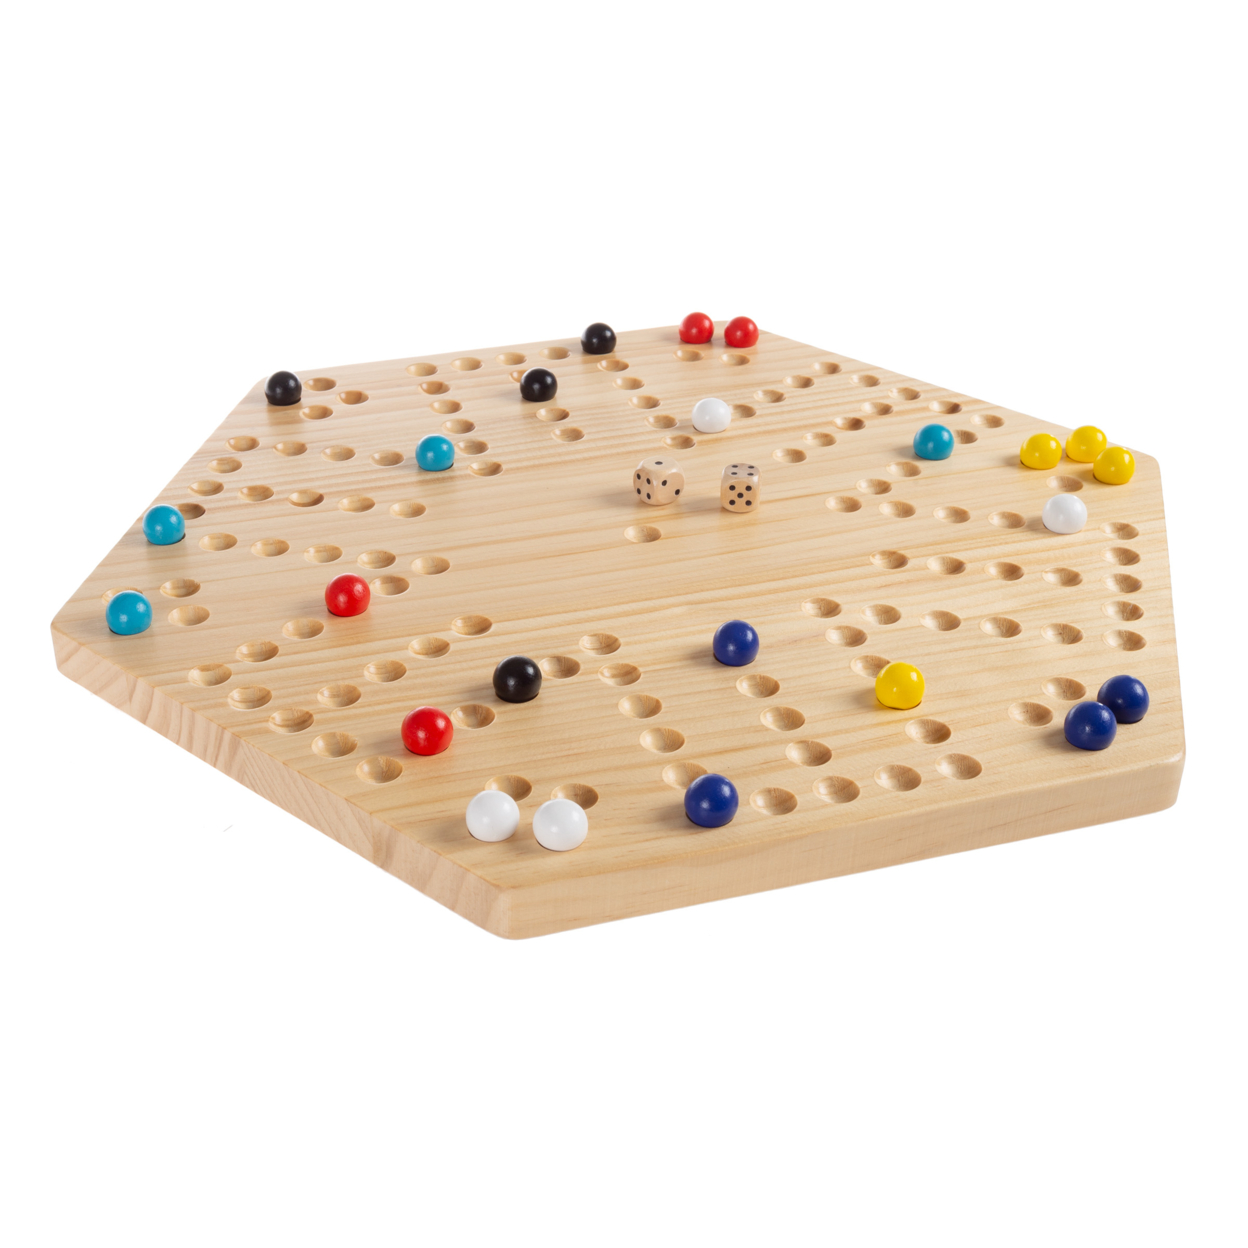 Classic Wooden Strategic Thinking Game Complete Set With Board, 24 Colored Marbles, 2 Dice- Fun